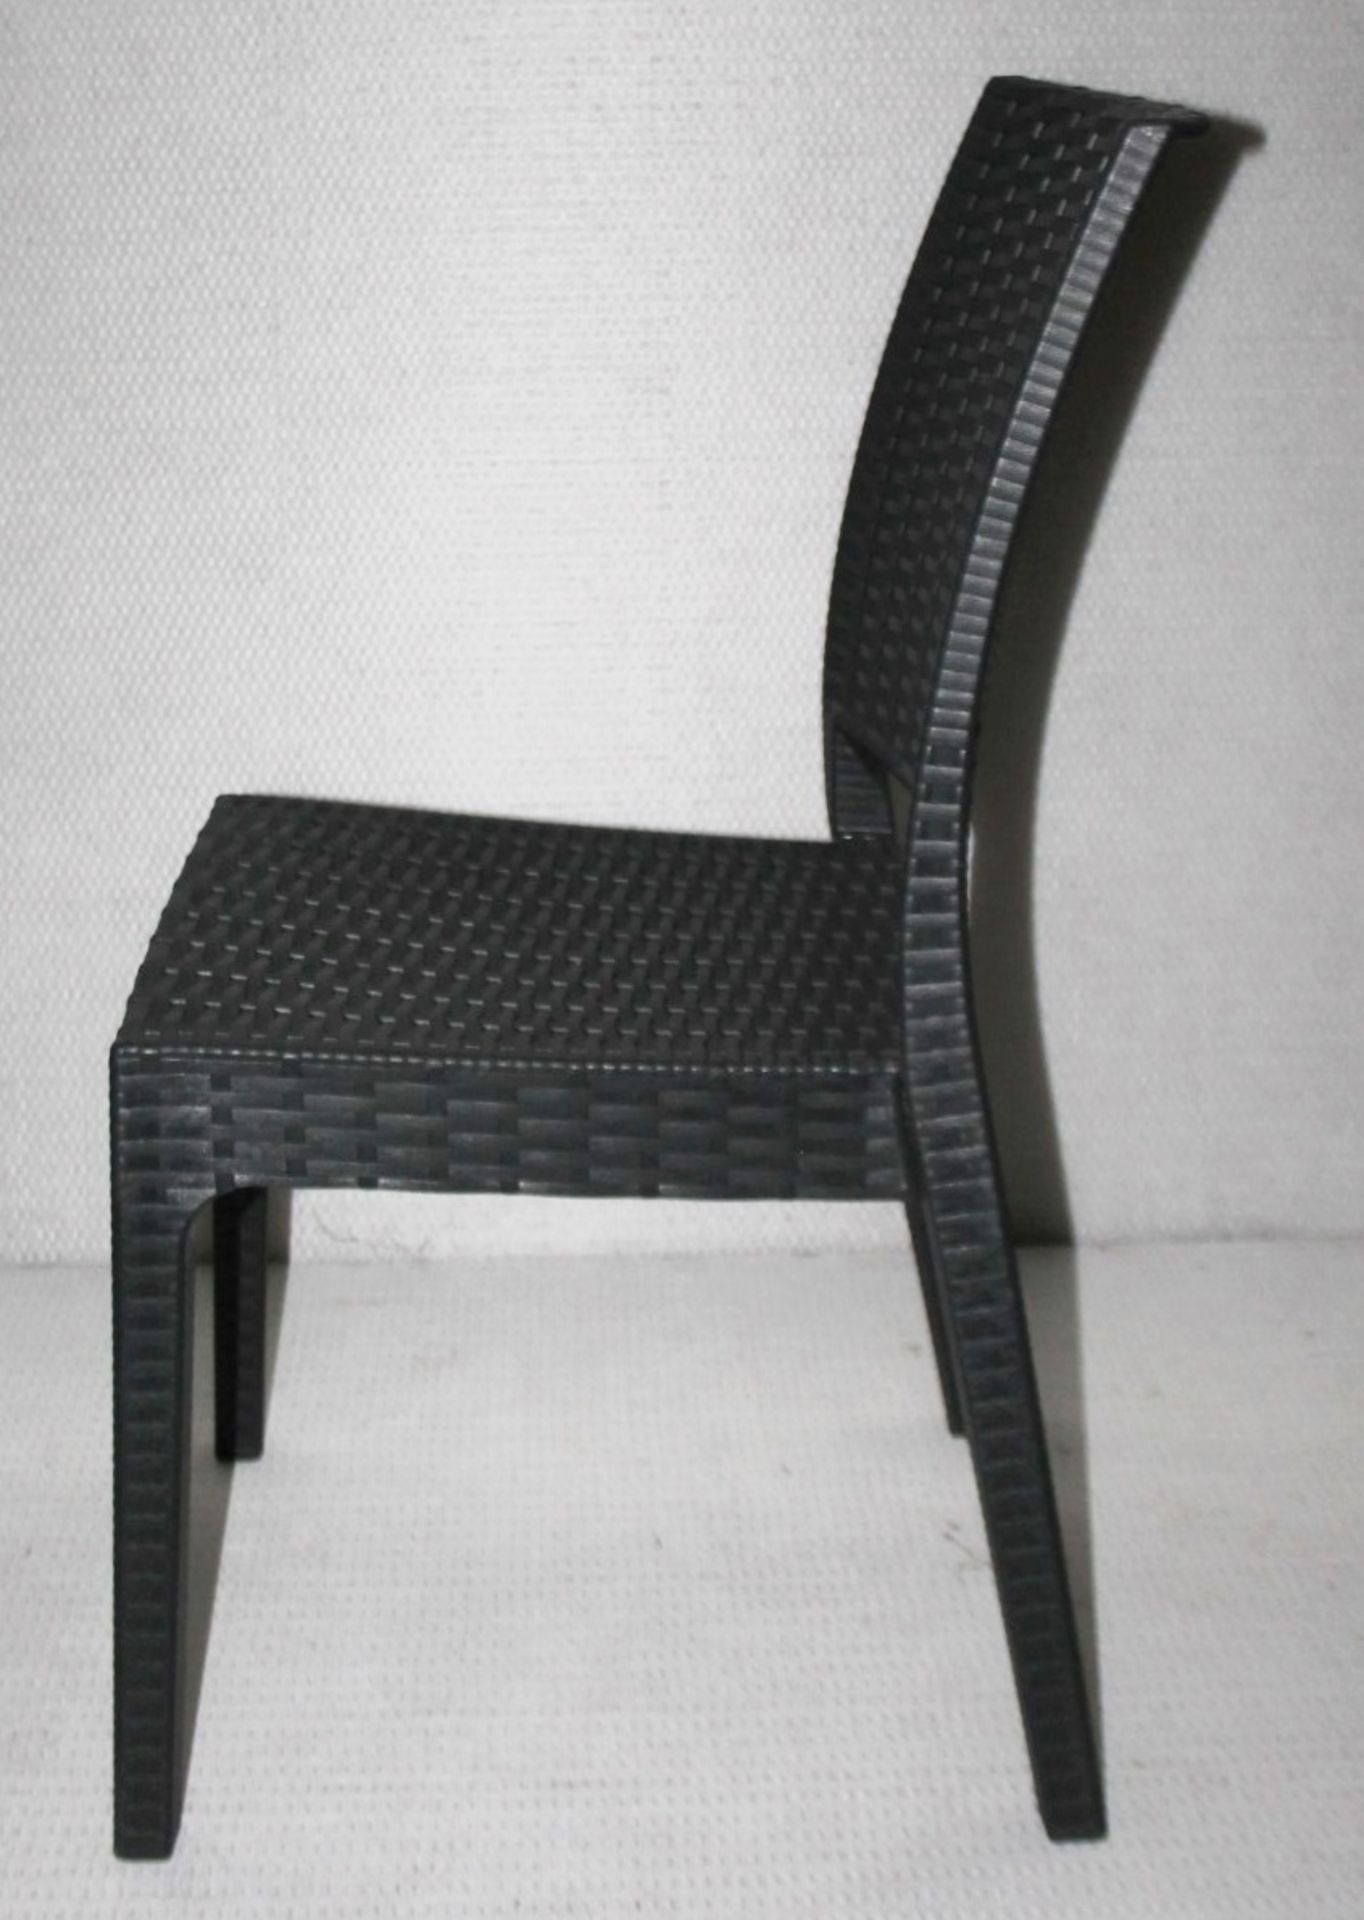 4 x SIESTA EXCLUSIVE 'Florida' Commercial Stackable Rattan-style Chairs In Dark Grey -CL987 - - Image 8 of 13